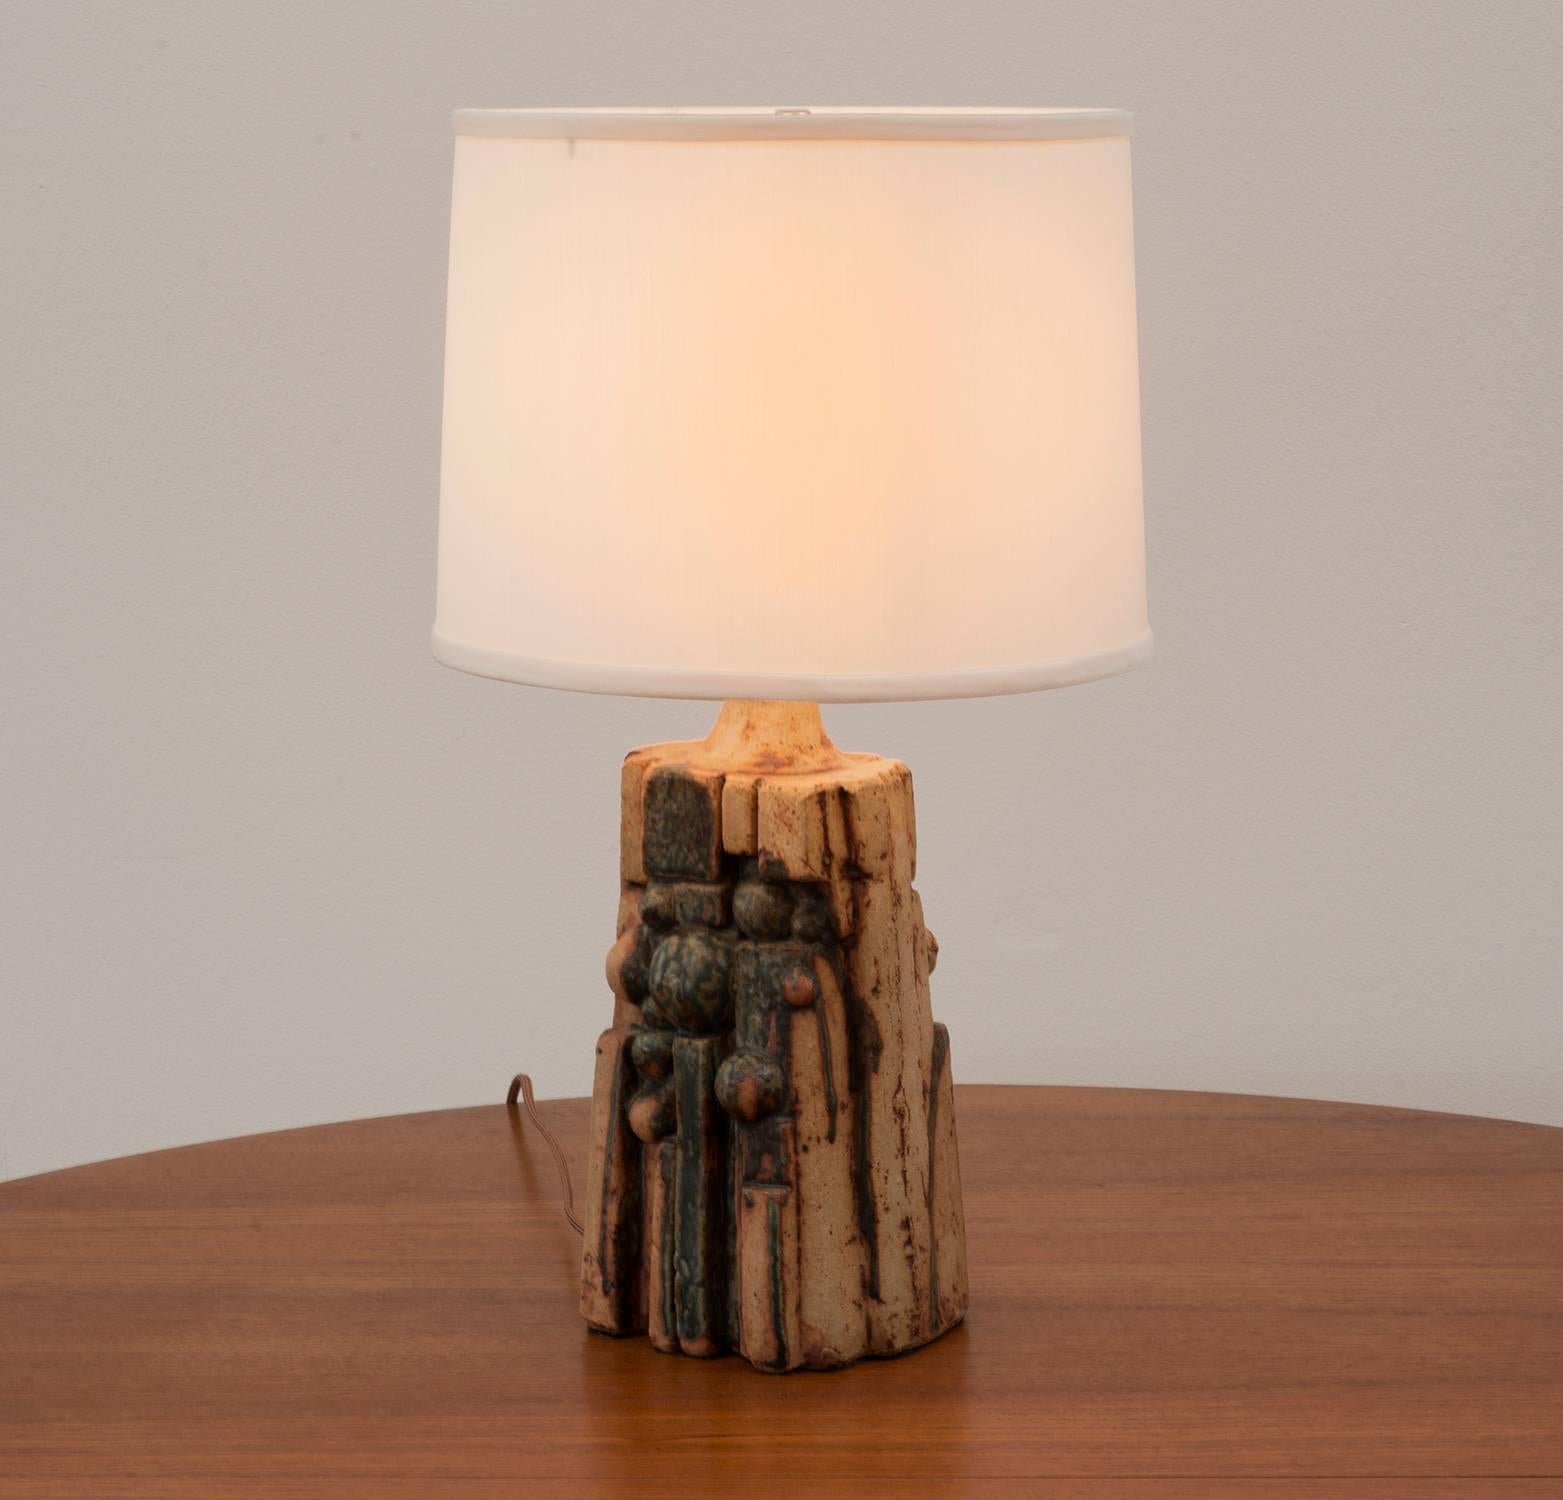 Sculptural, organic ceramic table lamp by Bernard Rooke with green and tan glaze. Signed 